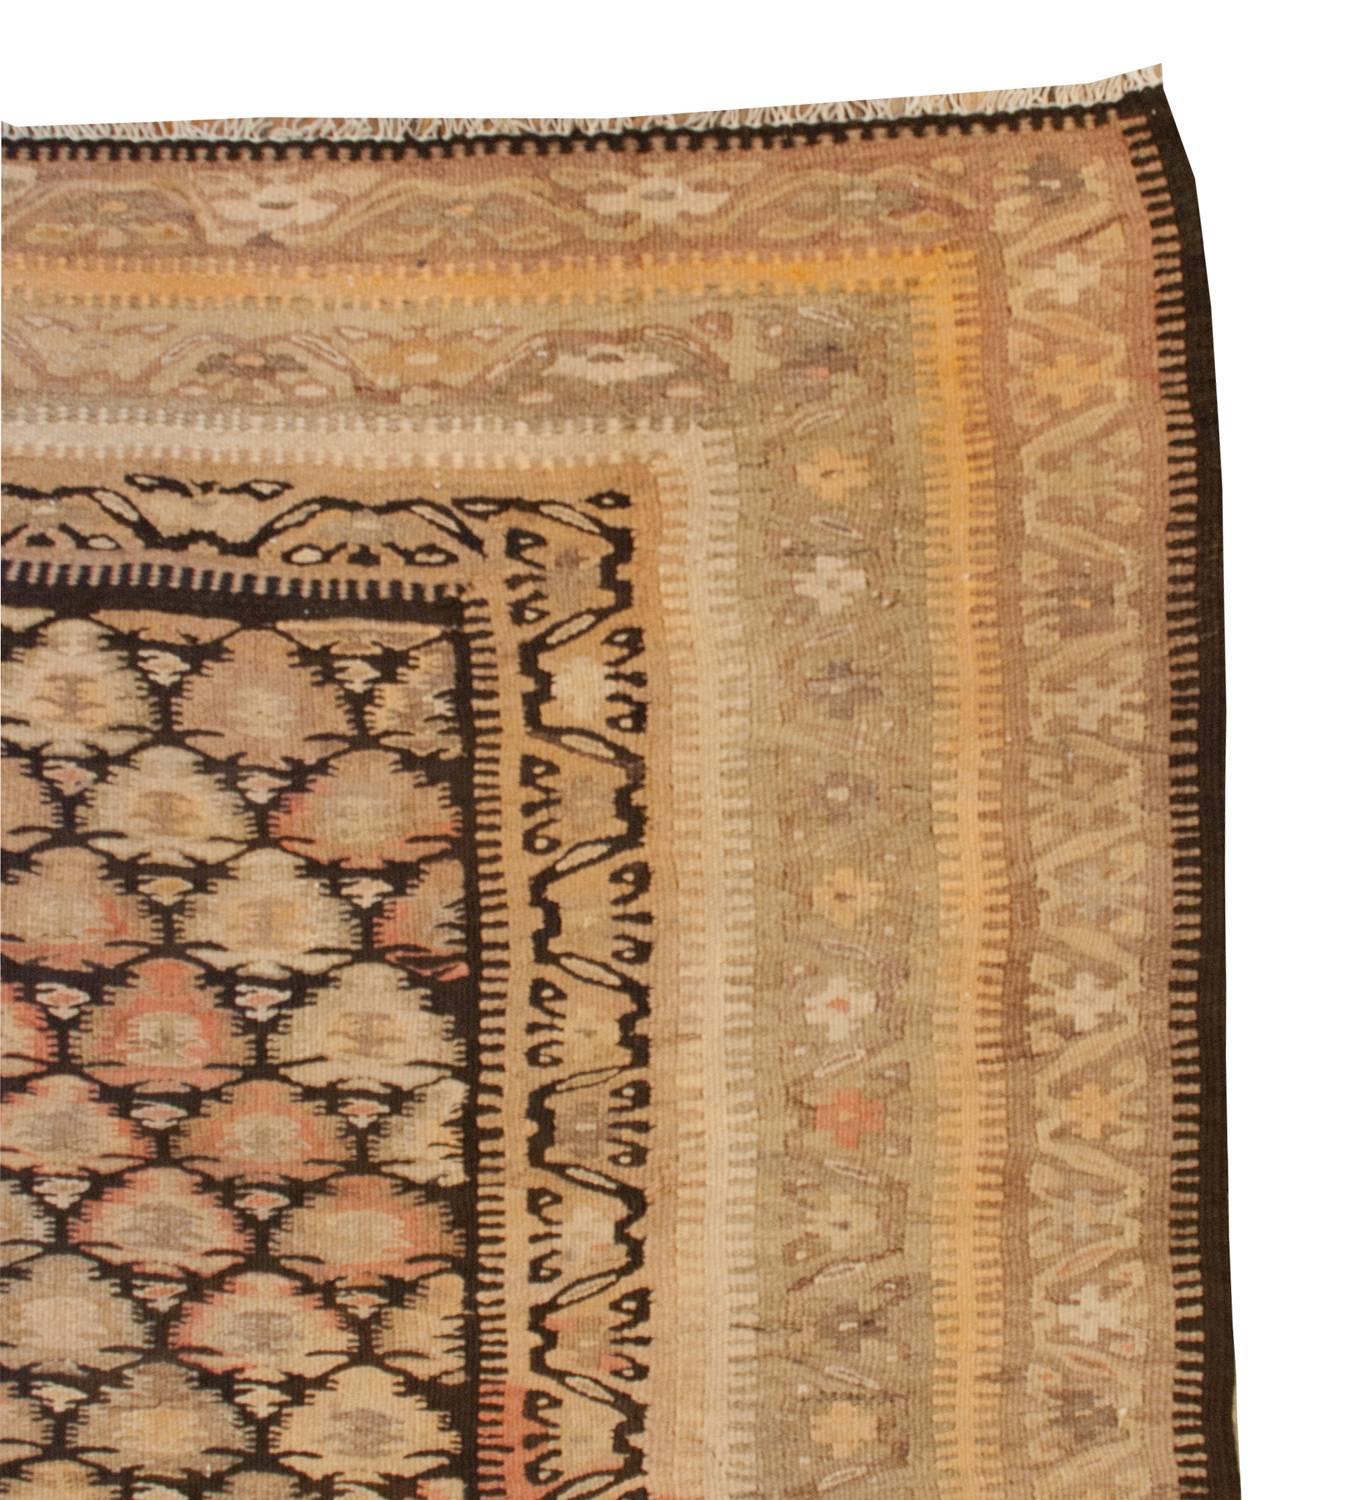 An incredible early 20th century Persian Qazvin Kilim runner with a masterfully woven pattern of stylized tree-of-life patterns woven in natural undid wool and vegetable dyed wool. The border is composed of multiple distinct patterns, each one